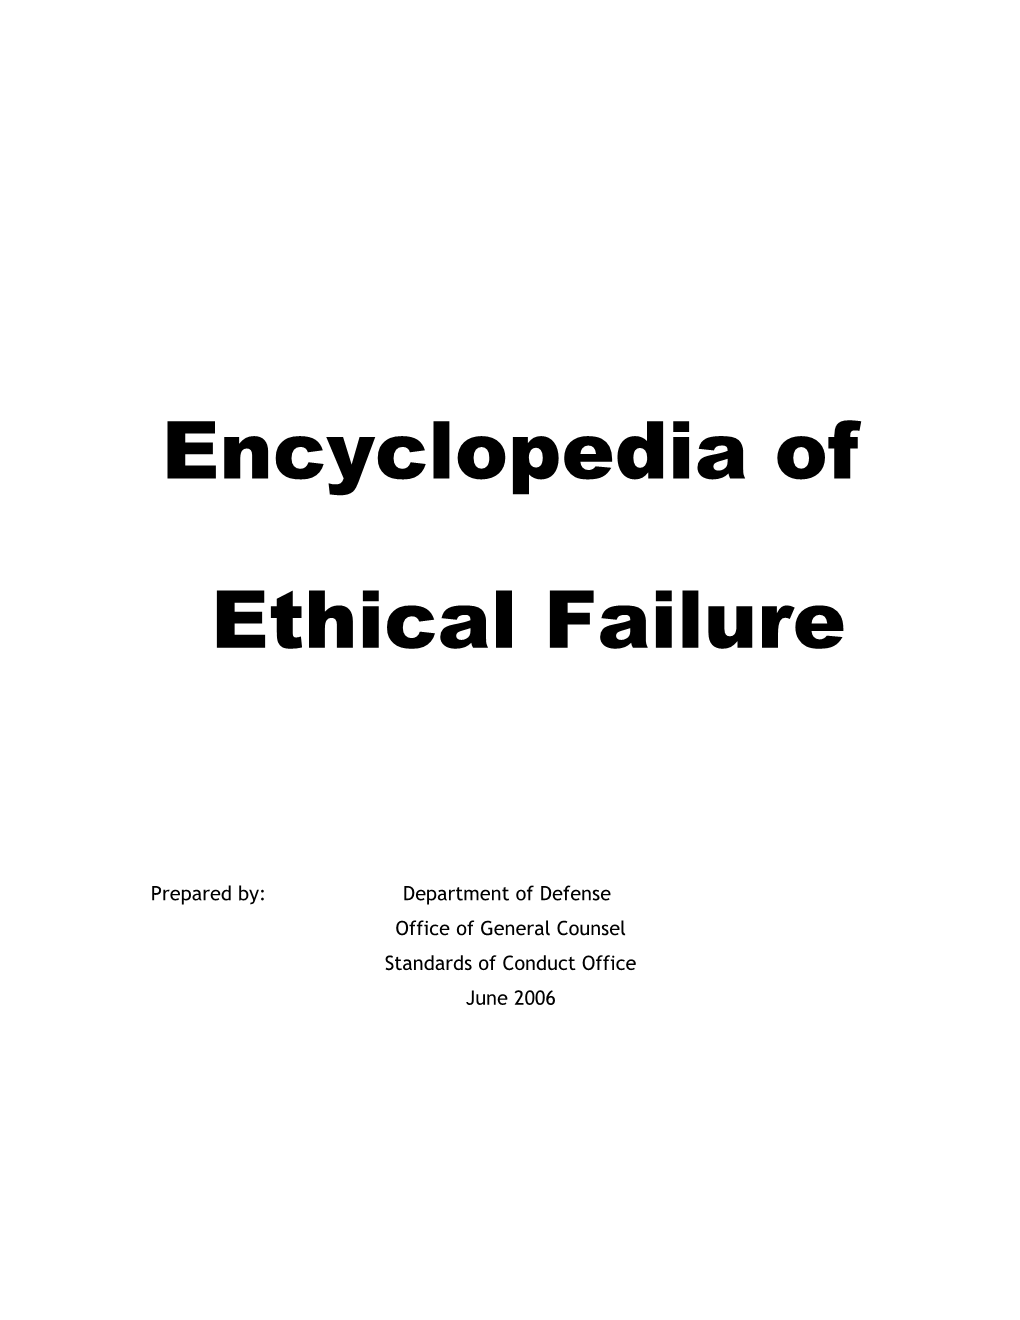 The Encyclopedia of Ethical Failure